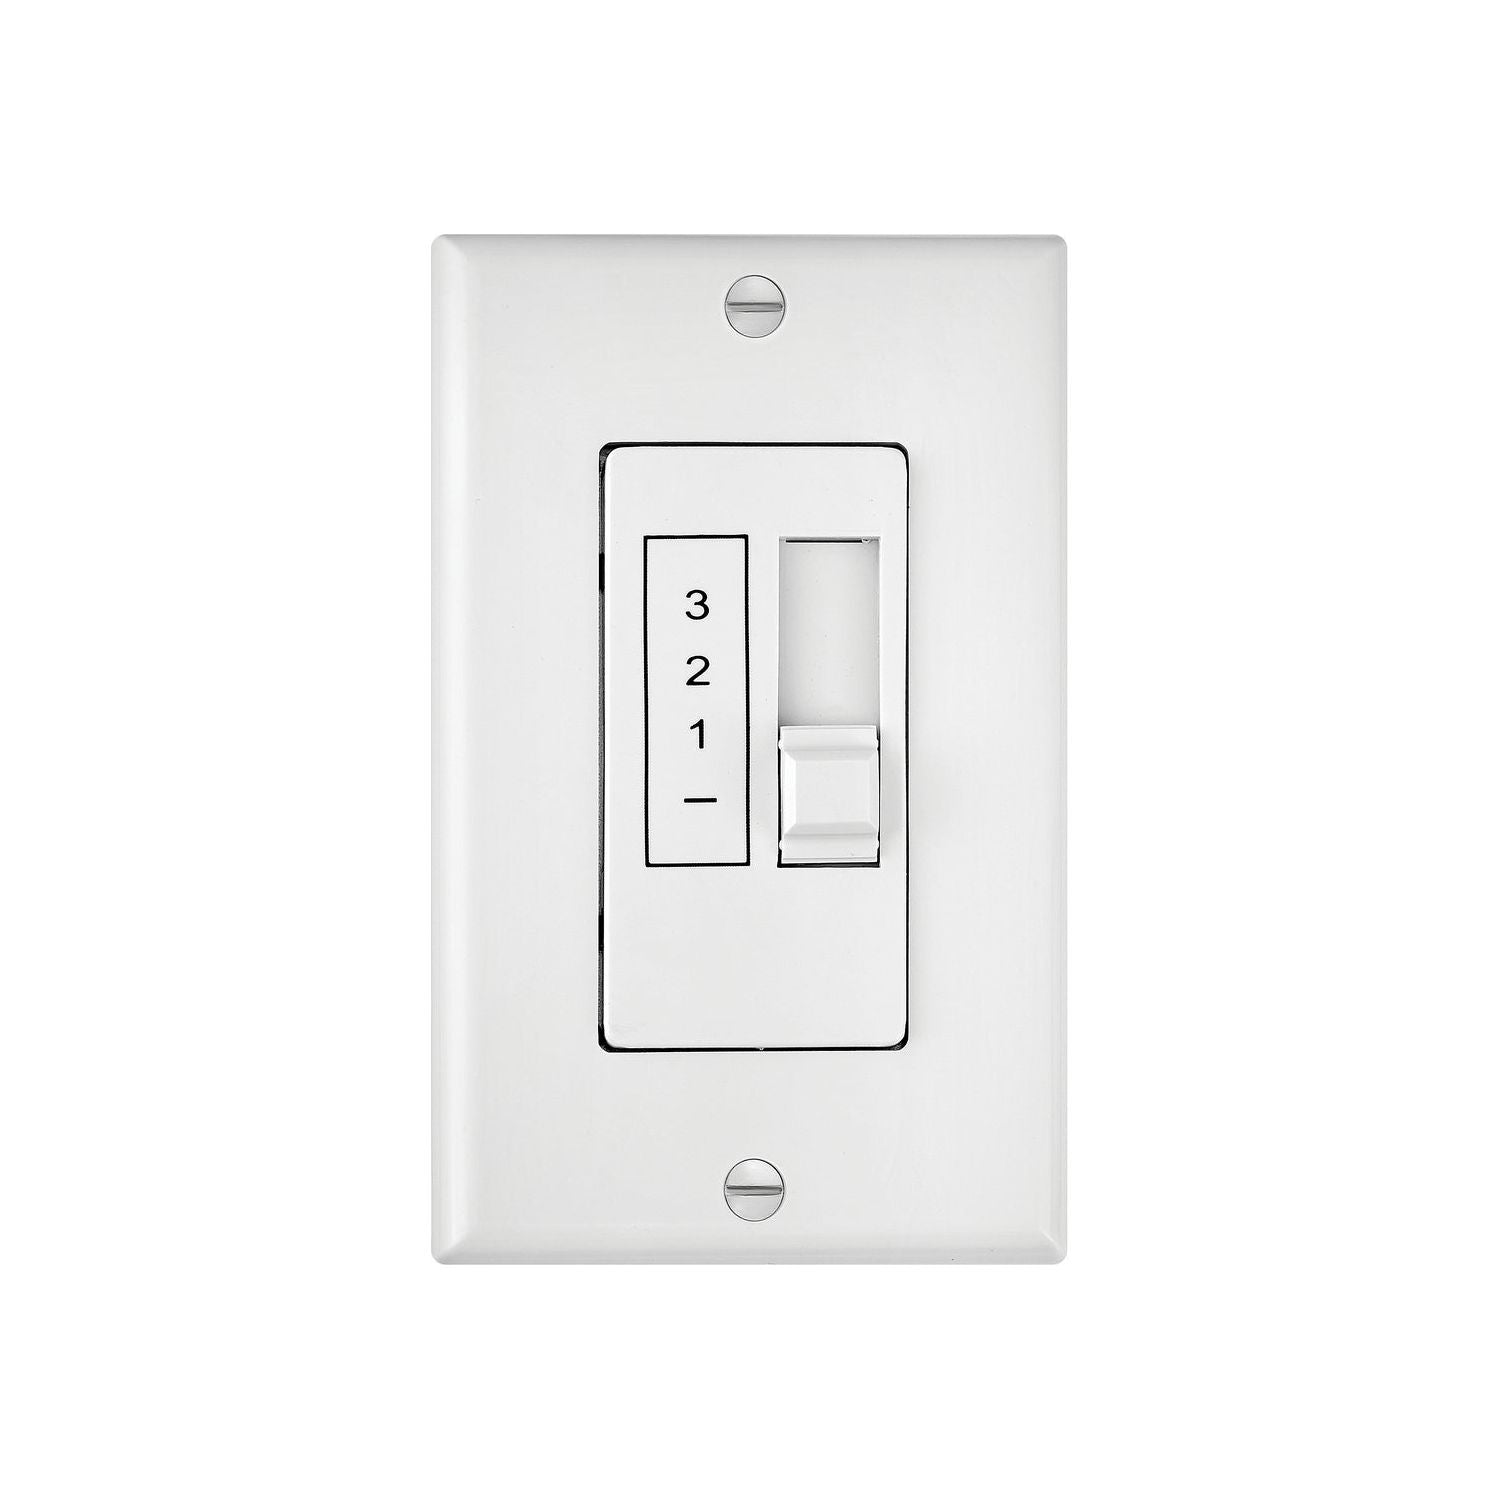 Hinkley Canada - 980012FWH - Wall Contol - Wall Control 3 Spd Slide 5 Amp - White